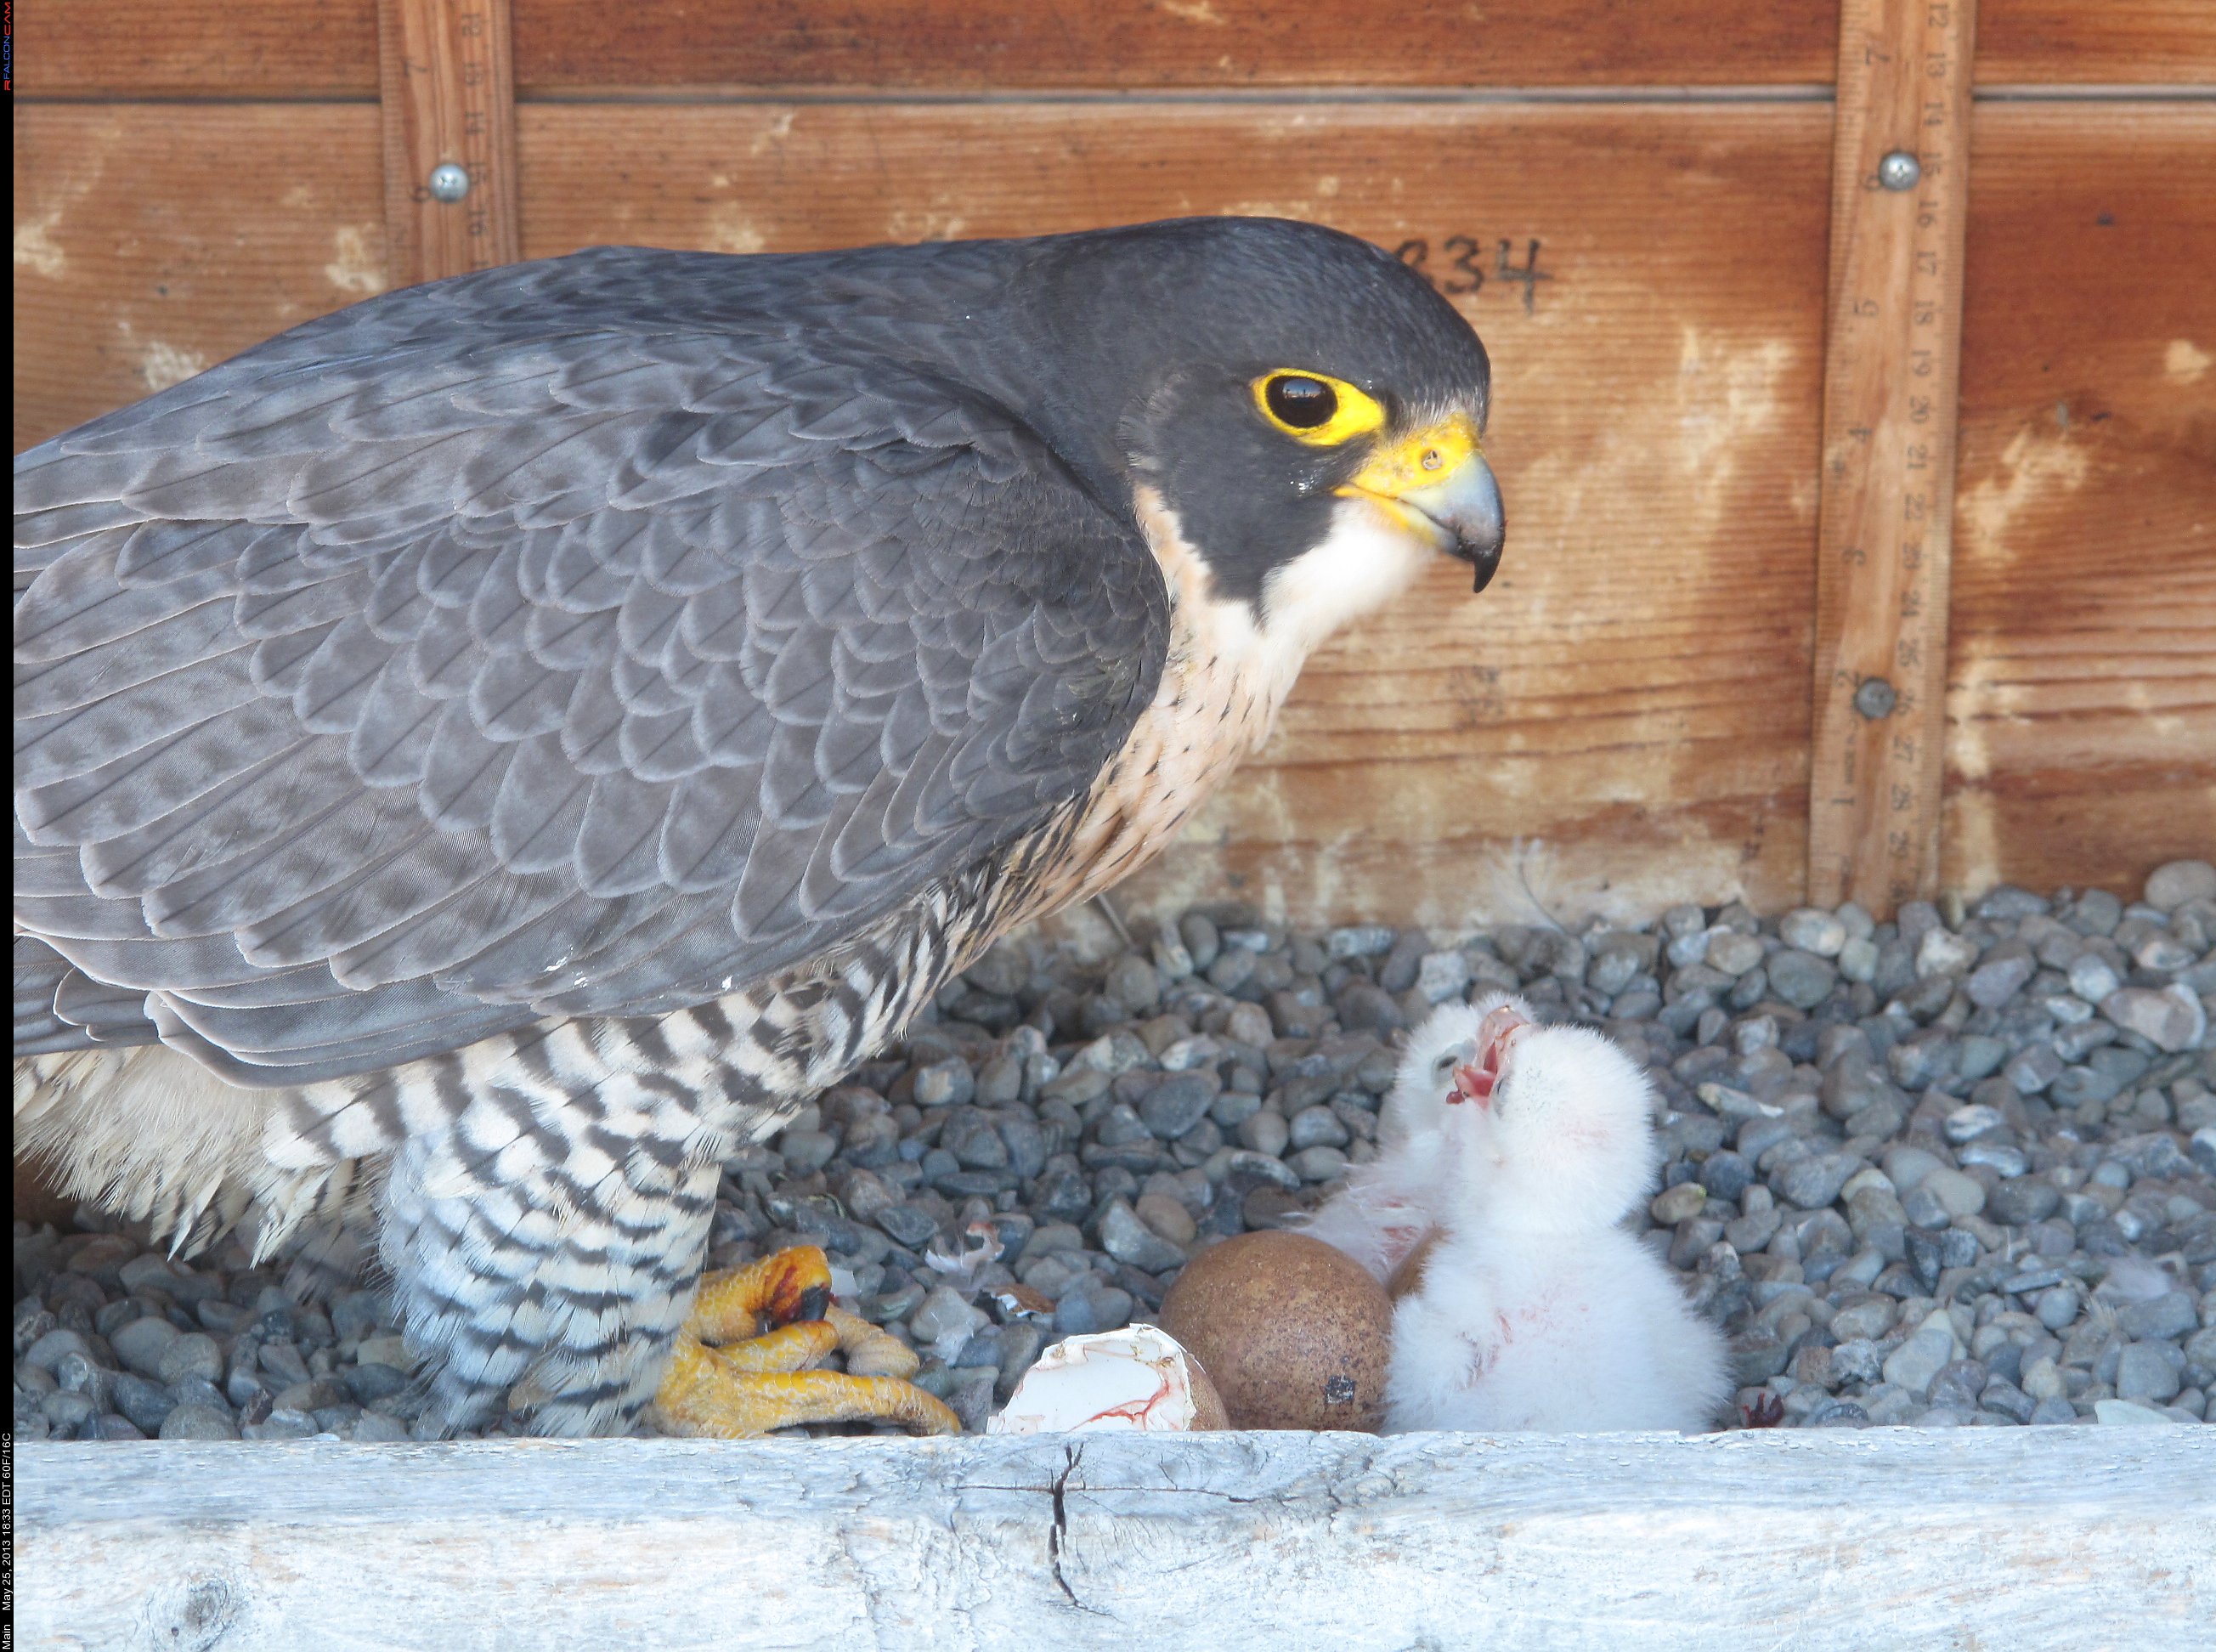 Beauty and Dot.ca’s 2nd Eyas Hatched at 4:04 pm! 5/25/13 « Imprints